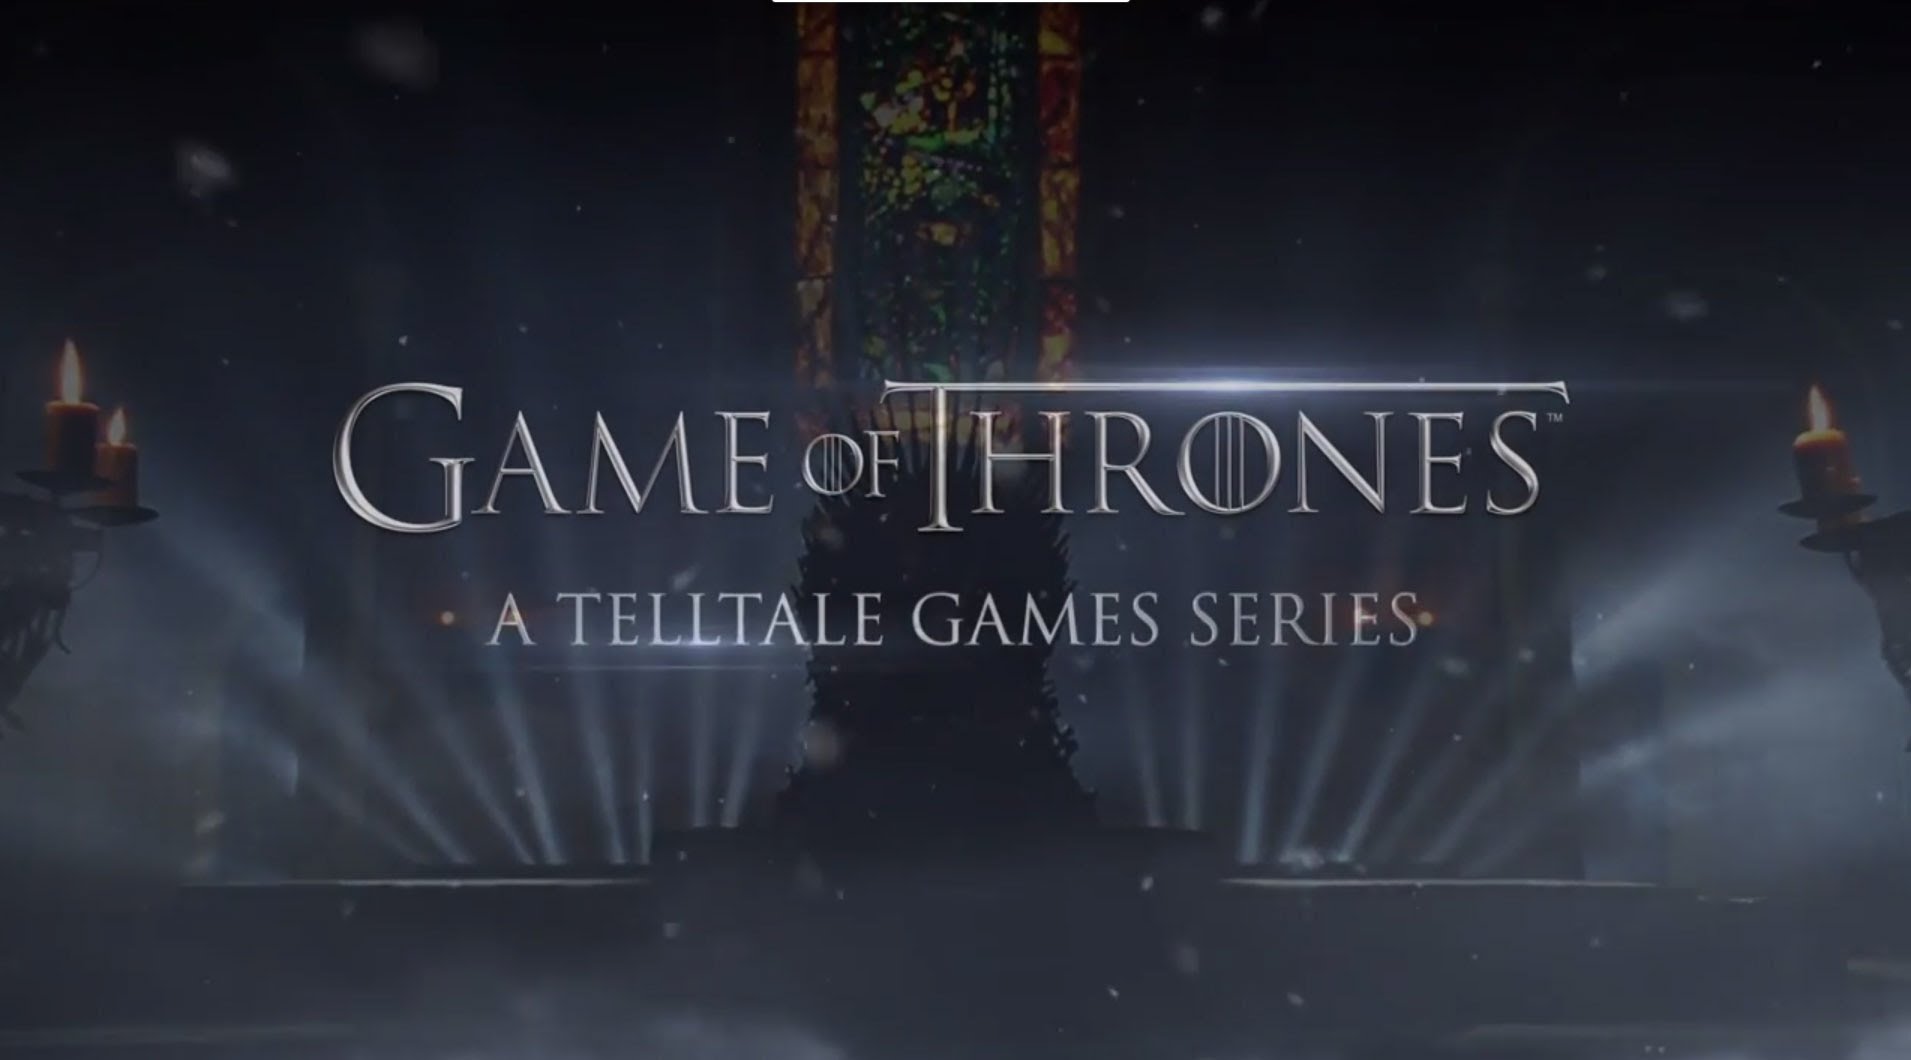 “Game of Thrones” Game Scheduled for Late 2014 - Winter is Coming